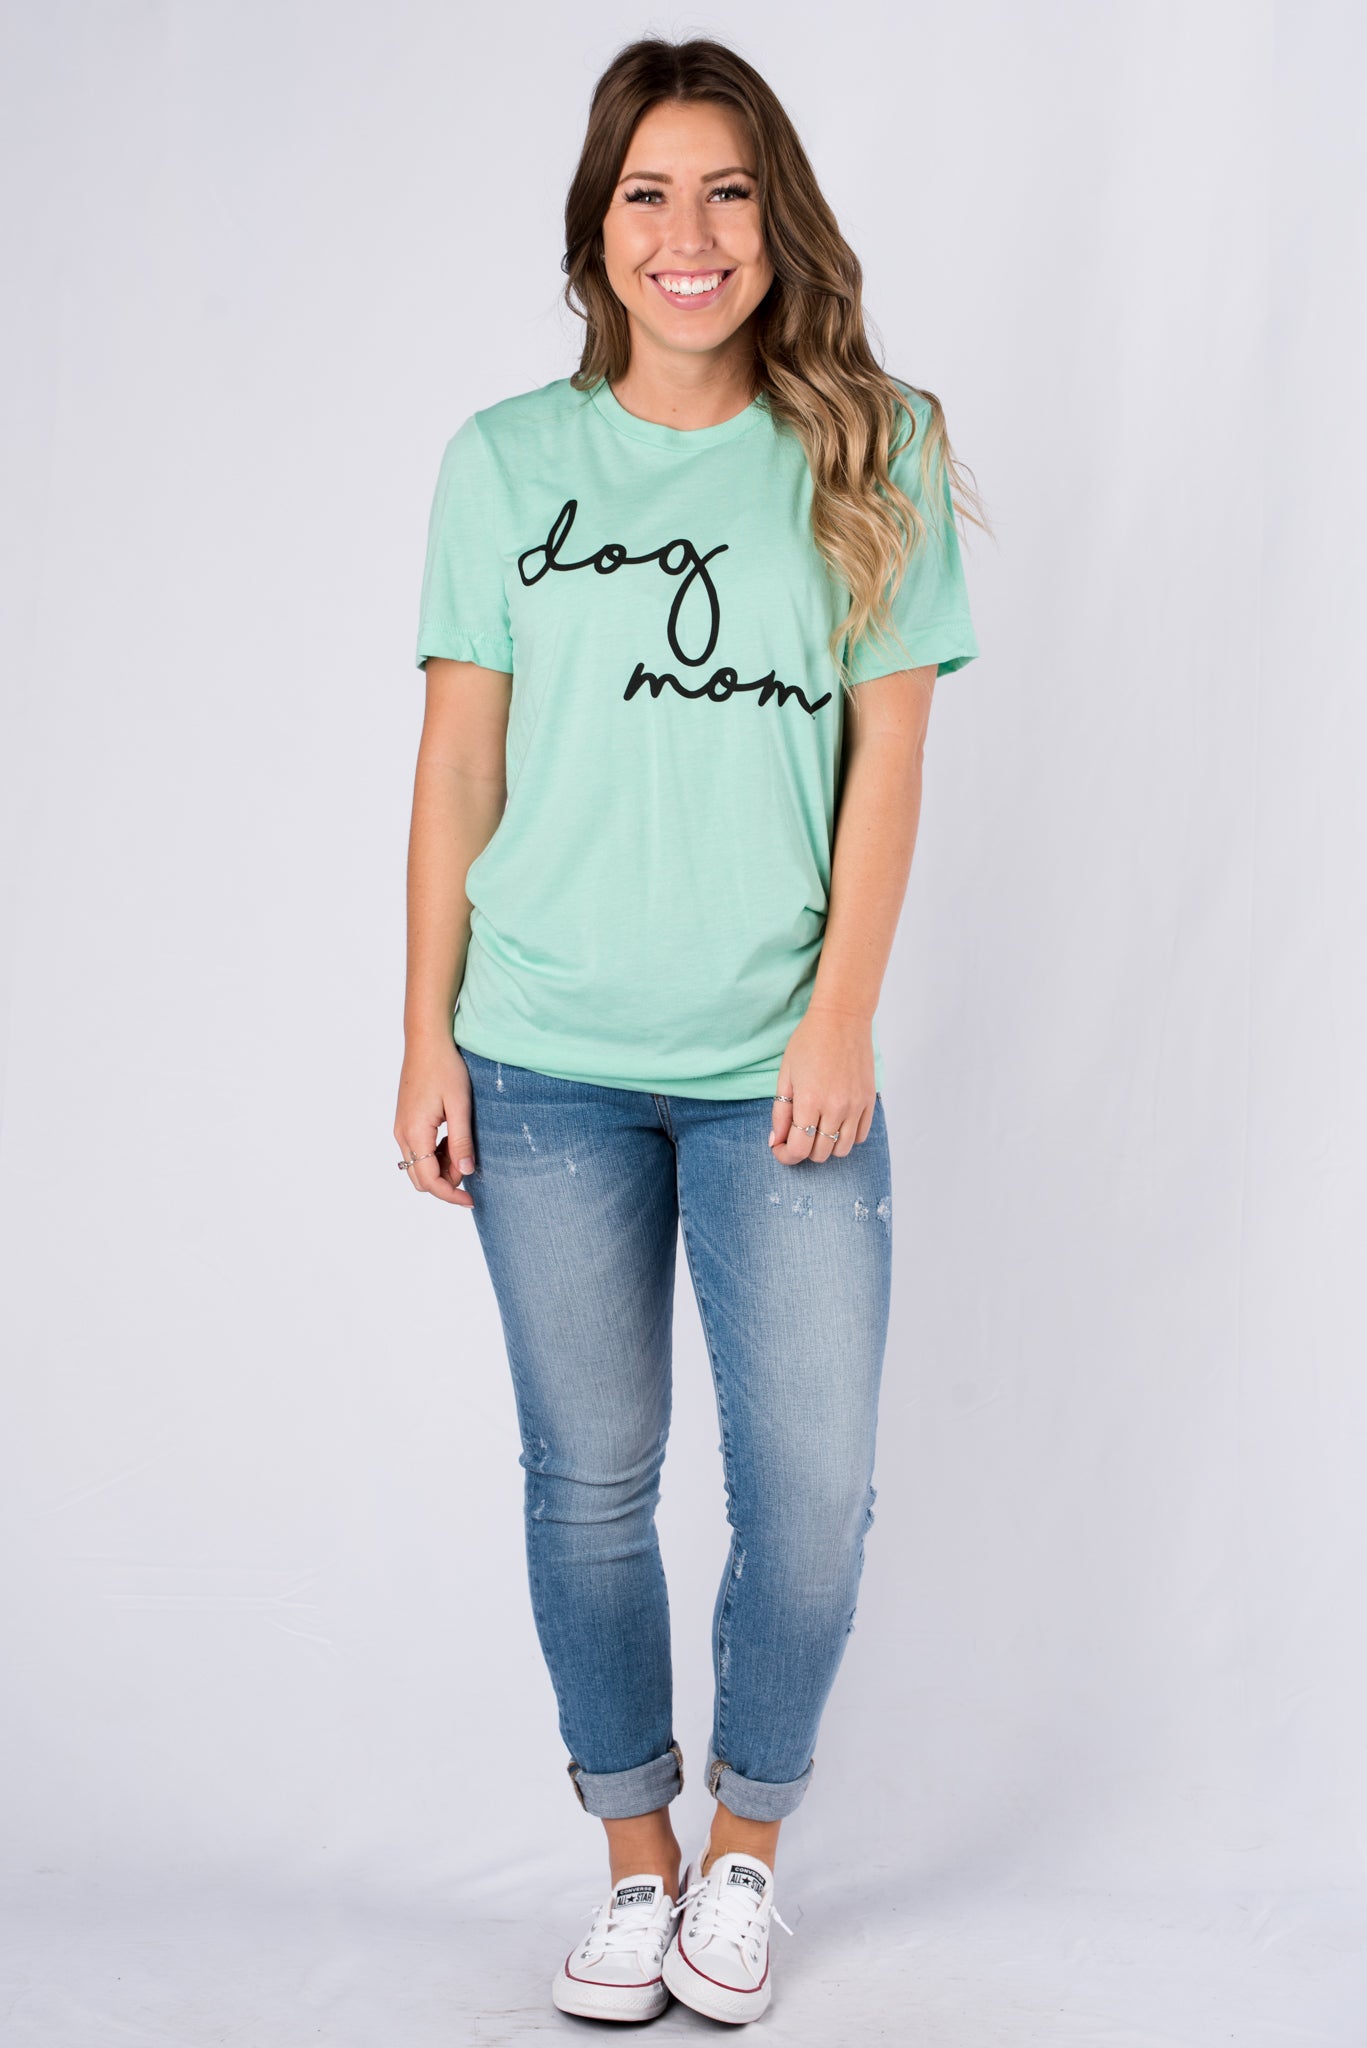 Dog mom large pride script short sleeve crew neck t-shirt mint - Trendy T-shirts - Cute Graphic Tee Fashion at Lush Fashion Lounge Boutique in Oklahoma